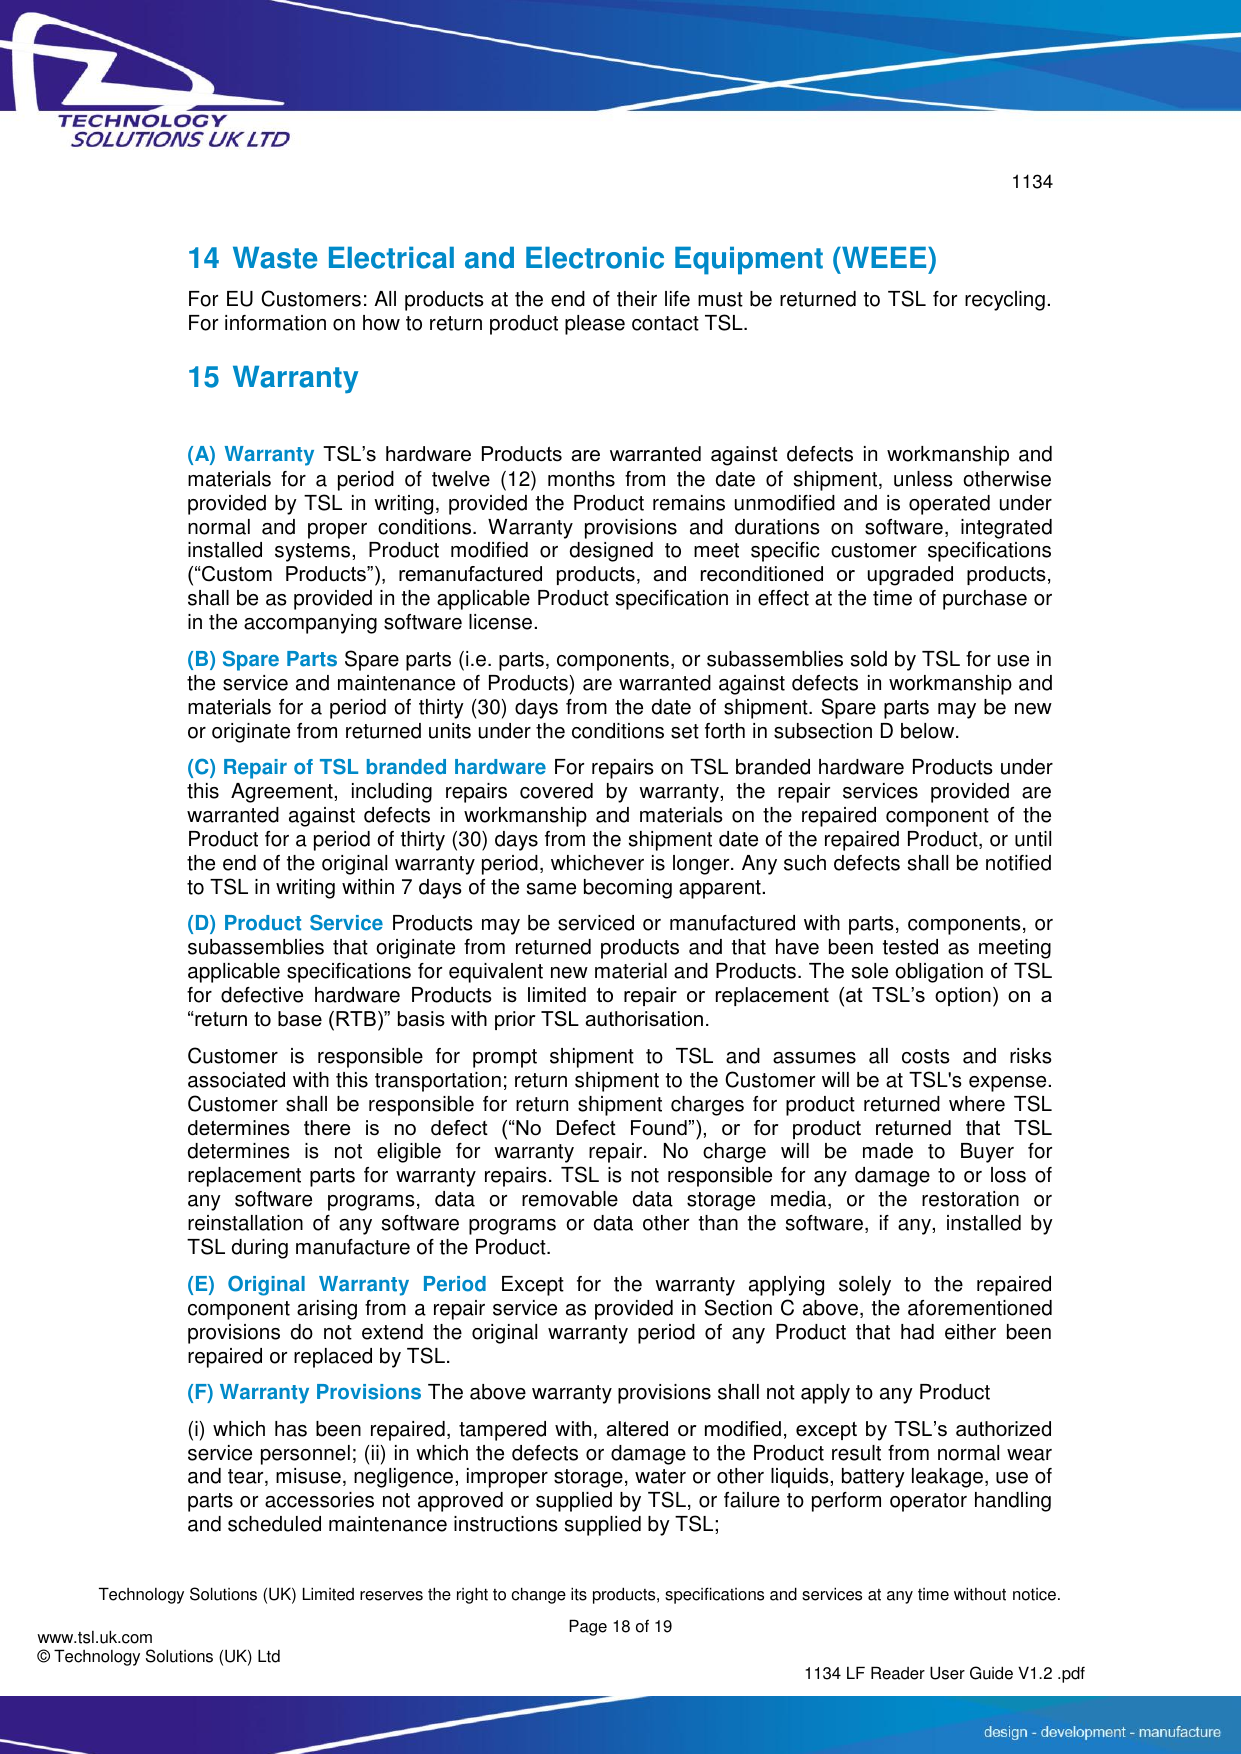        1134  Technology Solutions (UK) Limited reserves the right to change its products, specifications and services at any time without notice.   Page 18 of 19 1134 LF Reader User Guide V1.2 .pdf www.tsl.uk.com © Technology Solutions (UK) Ltd  14 Waste Electrical and Electronic Equipment (WEEE) For EU Customers: All products at the end of their life must be returned to TSL for recycling. For information on how to return product please contact TSL. 15 Warranty  (A) Warranty TSL’s  hardware  Products  are  warranted  against  defects in workmanship and materials  for  a  period  of  twelve  (12)  months  from  the  date  of  shipment,  unless  otherwise provided by TSL in writing, provided the Product remains unmodified and is operated under normal  and  proper  conditions.  Warranty  provisions  and  durations  on  software,  integrated installed  systems,  Product  modified  or  designed  to  meet  specific  customer  specifications (“Custom  Products”),  remanufactured  products,  and  reconditioned  or  upgraded  products, shall be as provided in the applicable Product specification in effect at the time of purchase or in the accompanying software license. (B) Spare Parts Spare parts (i.e. parts, components, or subassemblies sold by TSL for use in the service and maintenance of Products) are warranted against defects in workmanship and materials for a period of thirty (30) days from the date of shipment. Spare parts may be new or originate from returned units under the conditions set forth in subsection D below. (C) Repair of TSL branded hardware For repairs on TSL branded hardware Products under this  Agreement,  including  repairs  covered  by  warranty,  the  repair  services  provided  are warranted against defects in workmanship and materials on the repaired component of the Product for a period of thirty (30) days from the shipment date of the repaired Product, or until the end of the original warranty period, whichever is longer. Any such defects shall be notified to TSL in writing within 7 days of the same becoming apparent. (D) Product Service Products may be serviced or manufactured with parts, components, or subassemblies that originate from returned products and that have been tested as meeting applicable specifications for equivalent new material and Products. The sole obligation of TSL for  defective  hardware  Products  is  limited  to  repair  or  replacement  (at  TSL’s  option)  on  a “return to base (RTB)” basis with prior TSL authorisation. Customer  is  responsible  for  prompt  shipment  to  TSL  and  assumes  all  costs  and  risks associated with this transportation; return shipment to the Customer will be at TSL&apos;s expense. Customer shall be responsible for return shipment charges for product returned where TSL determines  there  is  no  defect  (“No  Defect  Found”),  or  for  product  returned  that  TSL determines  is  not  eligible  for  warranty  repair.  No  charge  will  be  made  to  Buyer  for replacement parts for warranty repairs. TSL is not responsible for any damage to or loss of any  software  programs,  data  or  removable  data  storage  media,  or  the  restoration  or reinstallation of  any software  programs  or data other than the  software, if  any,  installed  by TSL during manufacture of the Product. (E)  Original  Warranty  Period  Except  for  the  warranty  applying  solely  to  the  repaired component arising from a repair service as provided in Section C above, the aforementioned provisions  do  not  extend  the  original  warranty  period  of  any  Product  that  had  either  been repaired or replaced by TSL. (F) Warranty Provisions The above warranty provisions shall not apply to any Product (i) which has been repaired, tampered with, altered  or modified, except by TSL’s authorized service personnel; (ii) in which the defects or damage to the Product result from normal wear and tear, misuse, negligence, improper storage, water or other liquids, battery leakage, use of parts or accessories not approved or supplied by TSL, or failure to perform operator handling and scheduled maintenance instructions supplied by TSL; 